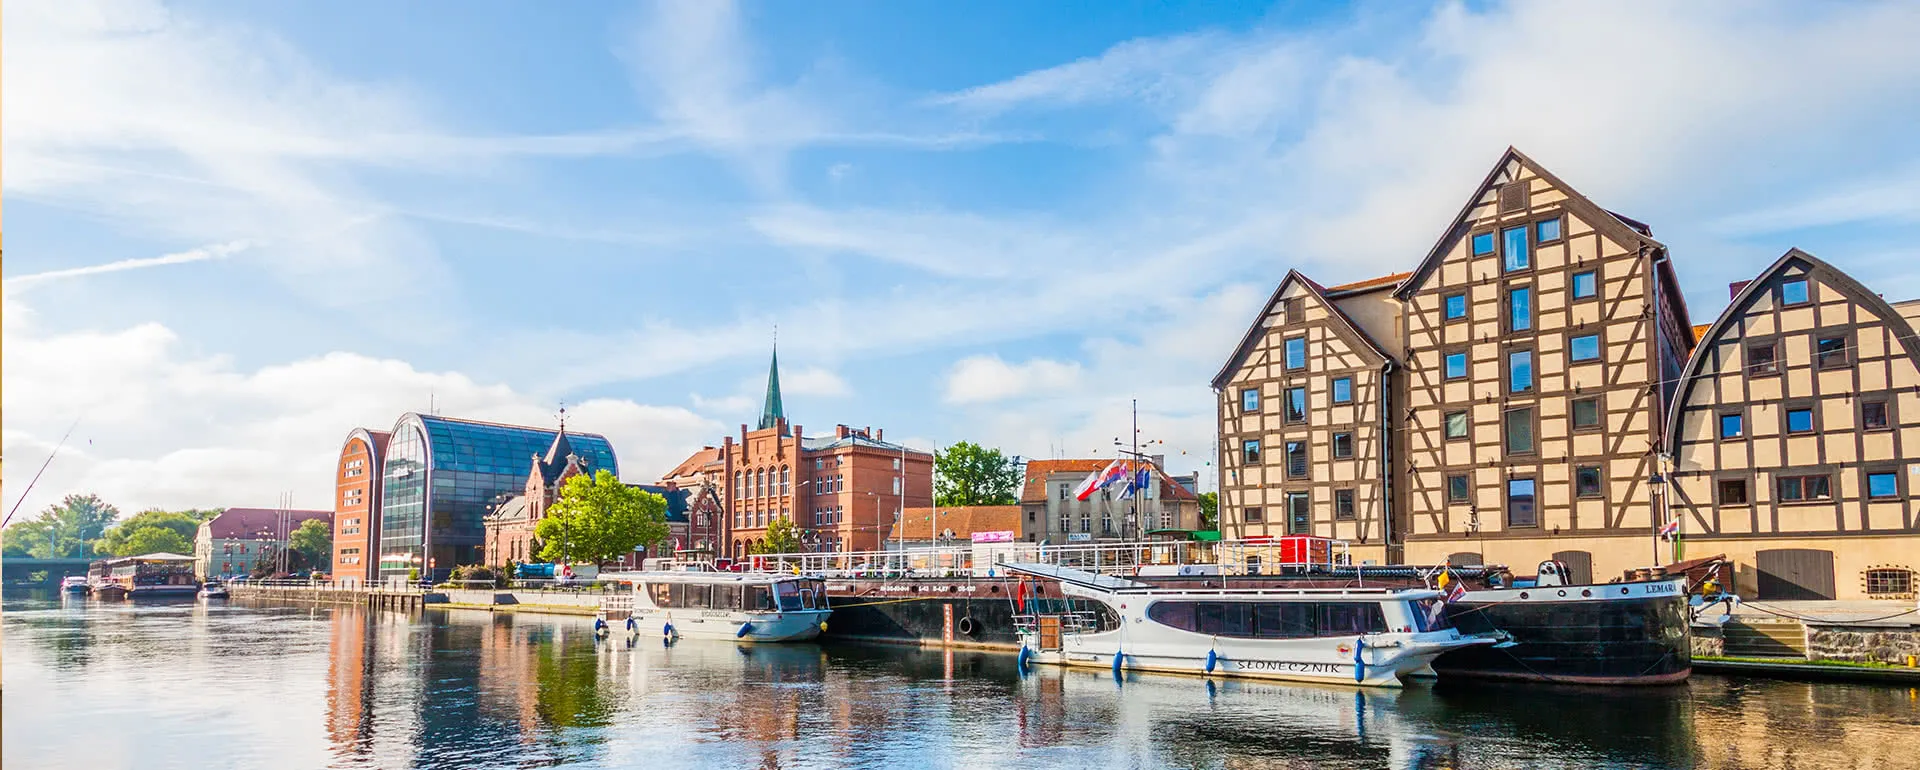 Bydgoszcz - the destination with youth hostels